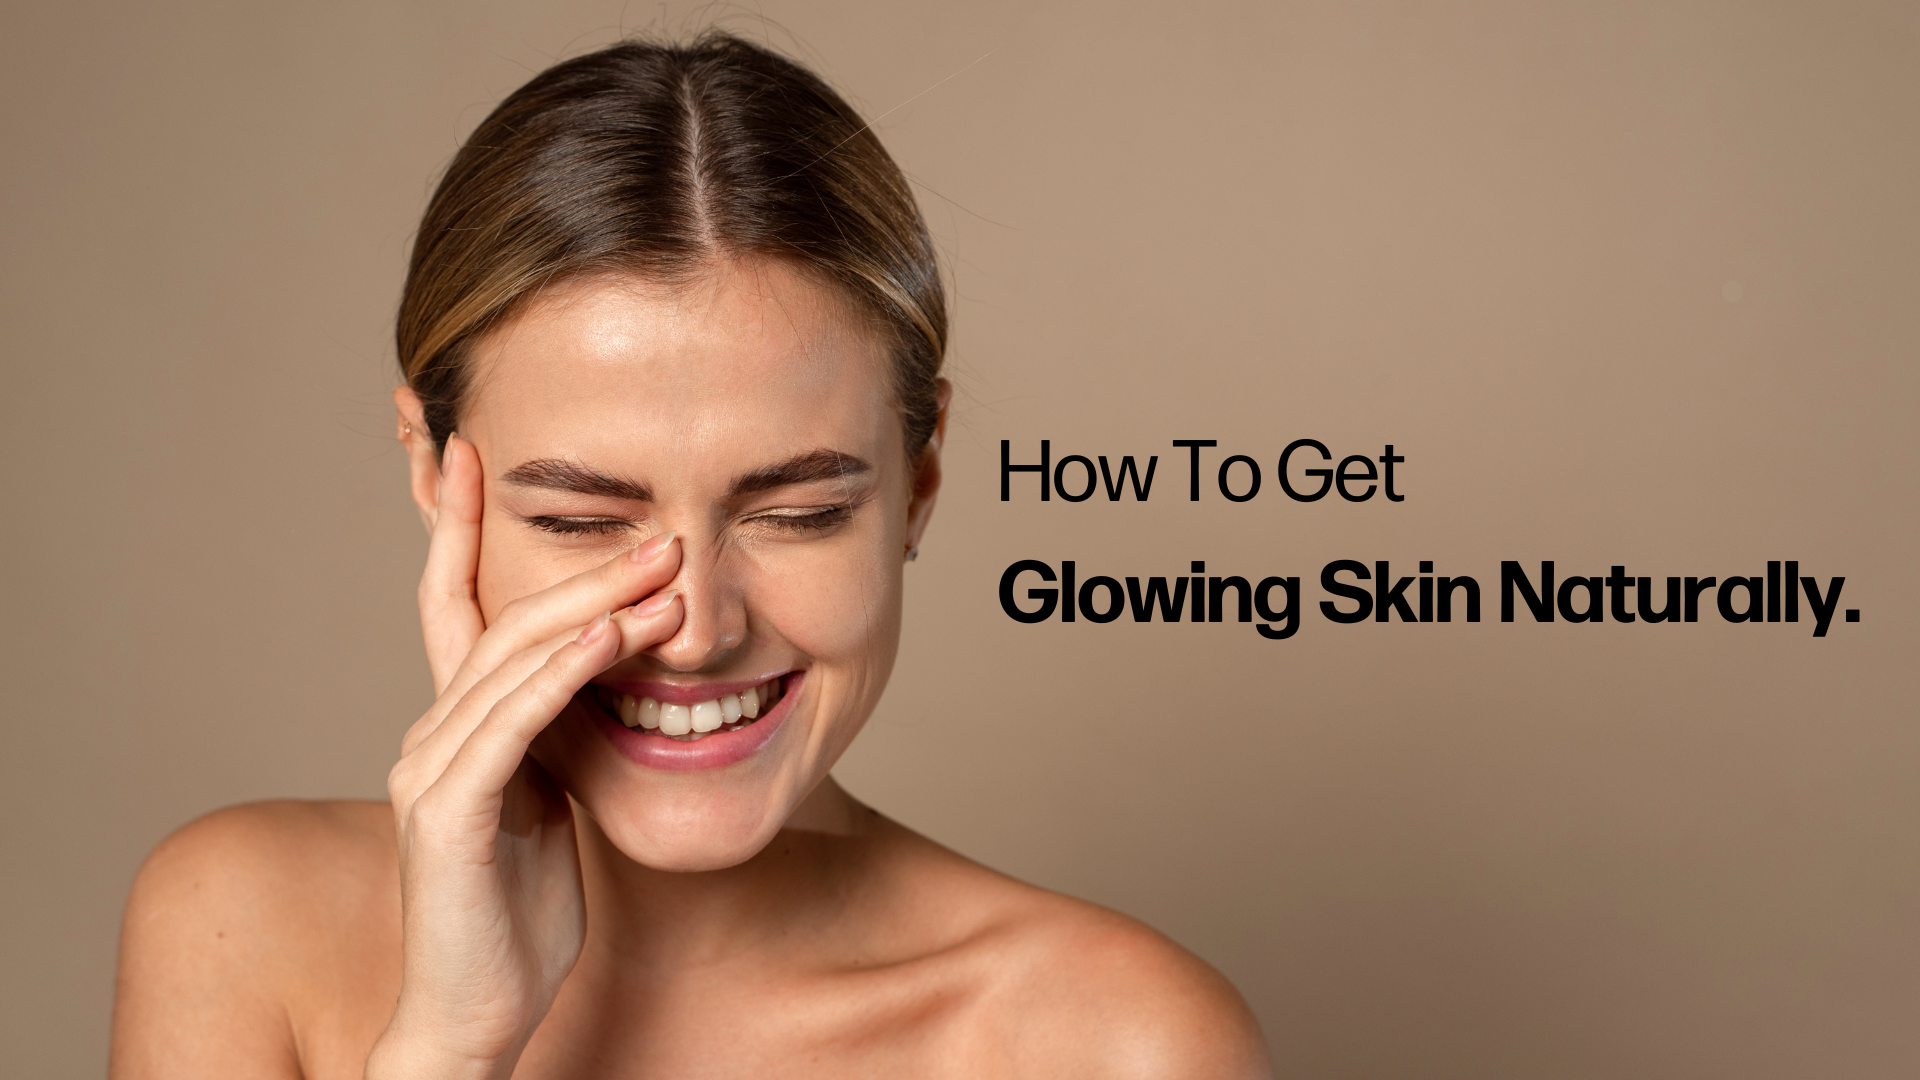 How To Get Glowing Skin Naturally